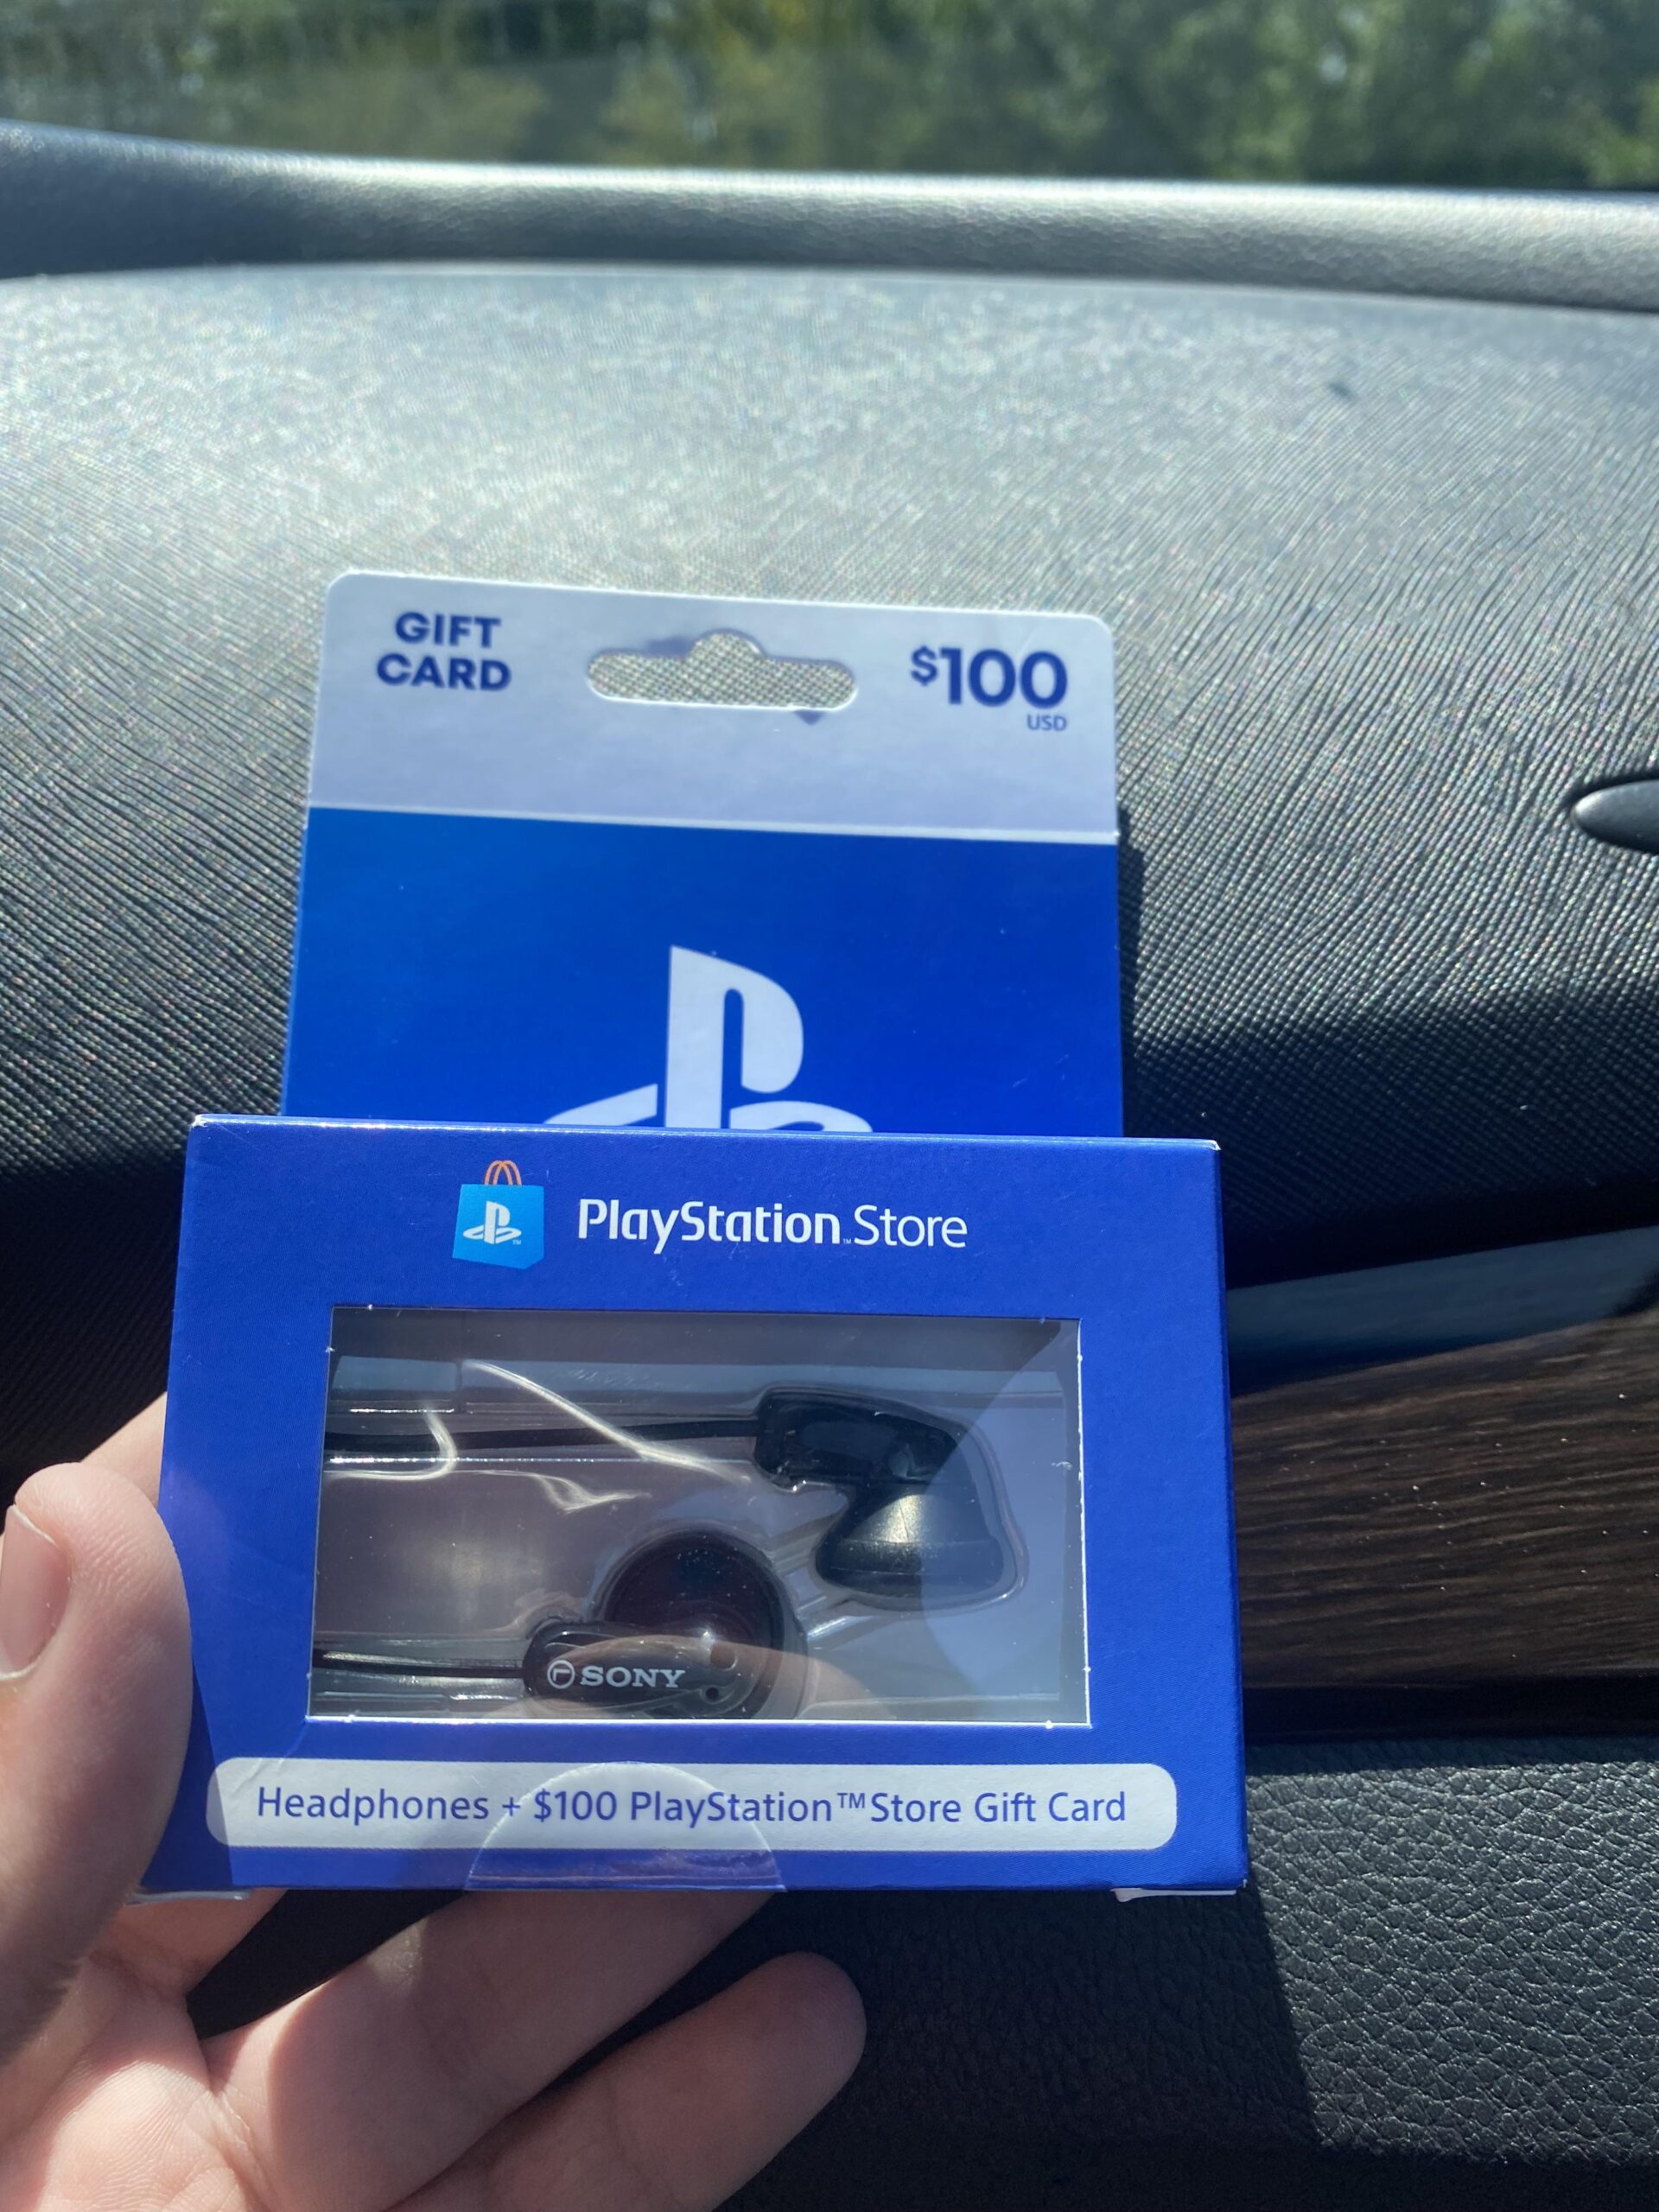 Get a $10  Gift Card When You Purchase This $100 PlayStation